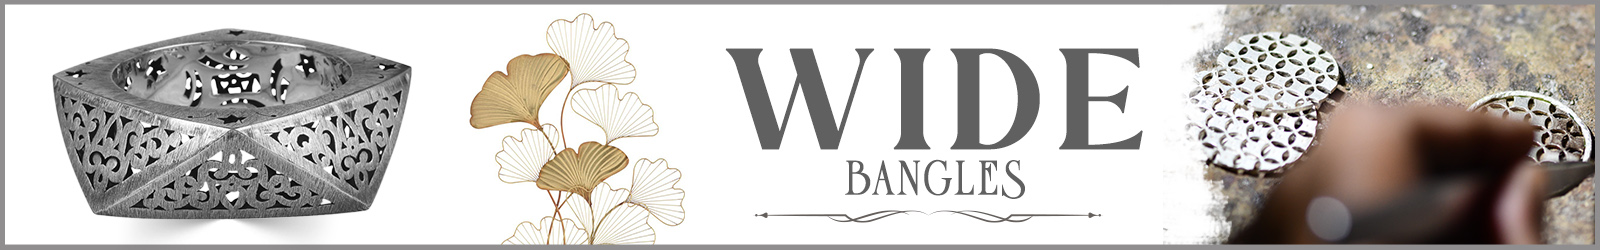 Wide Bangle Silver Jewelry Shop, Store, Supplier in Jaipur